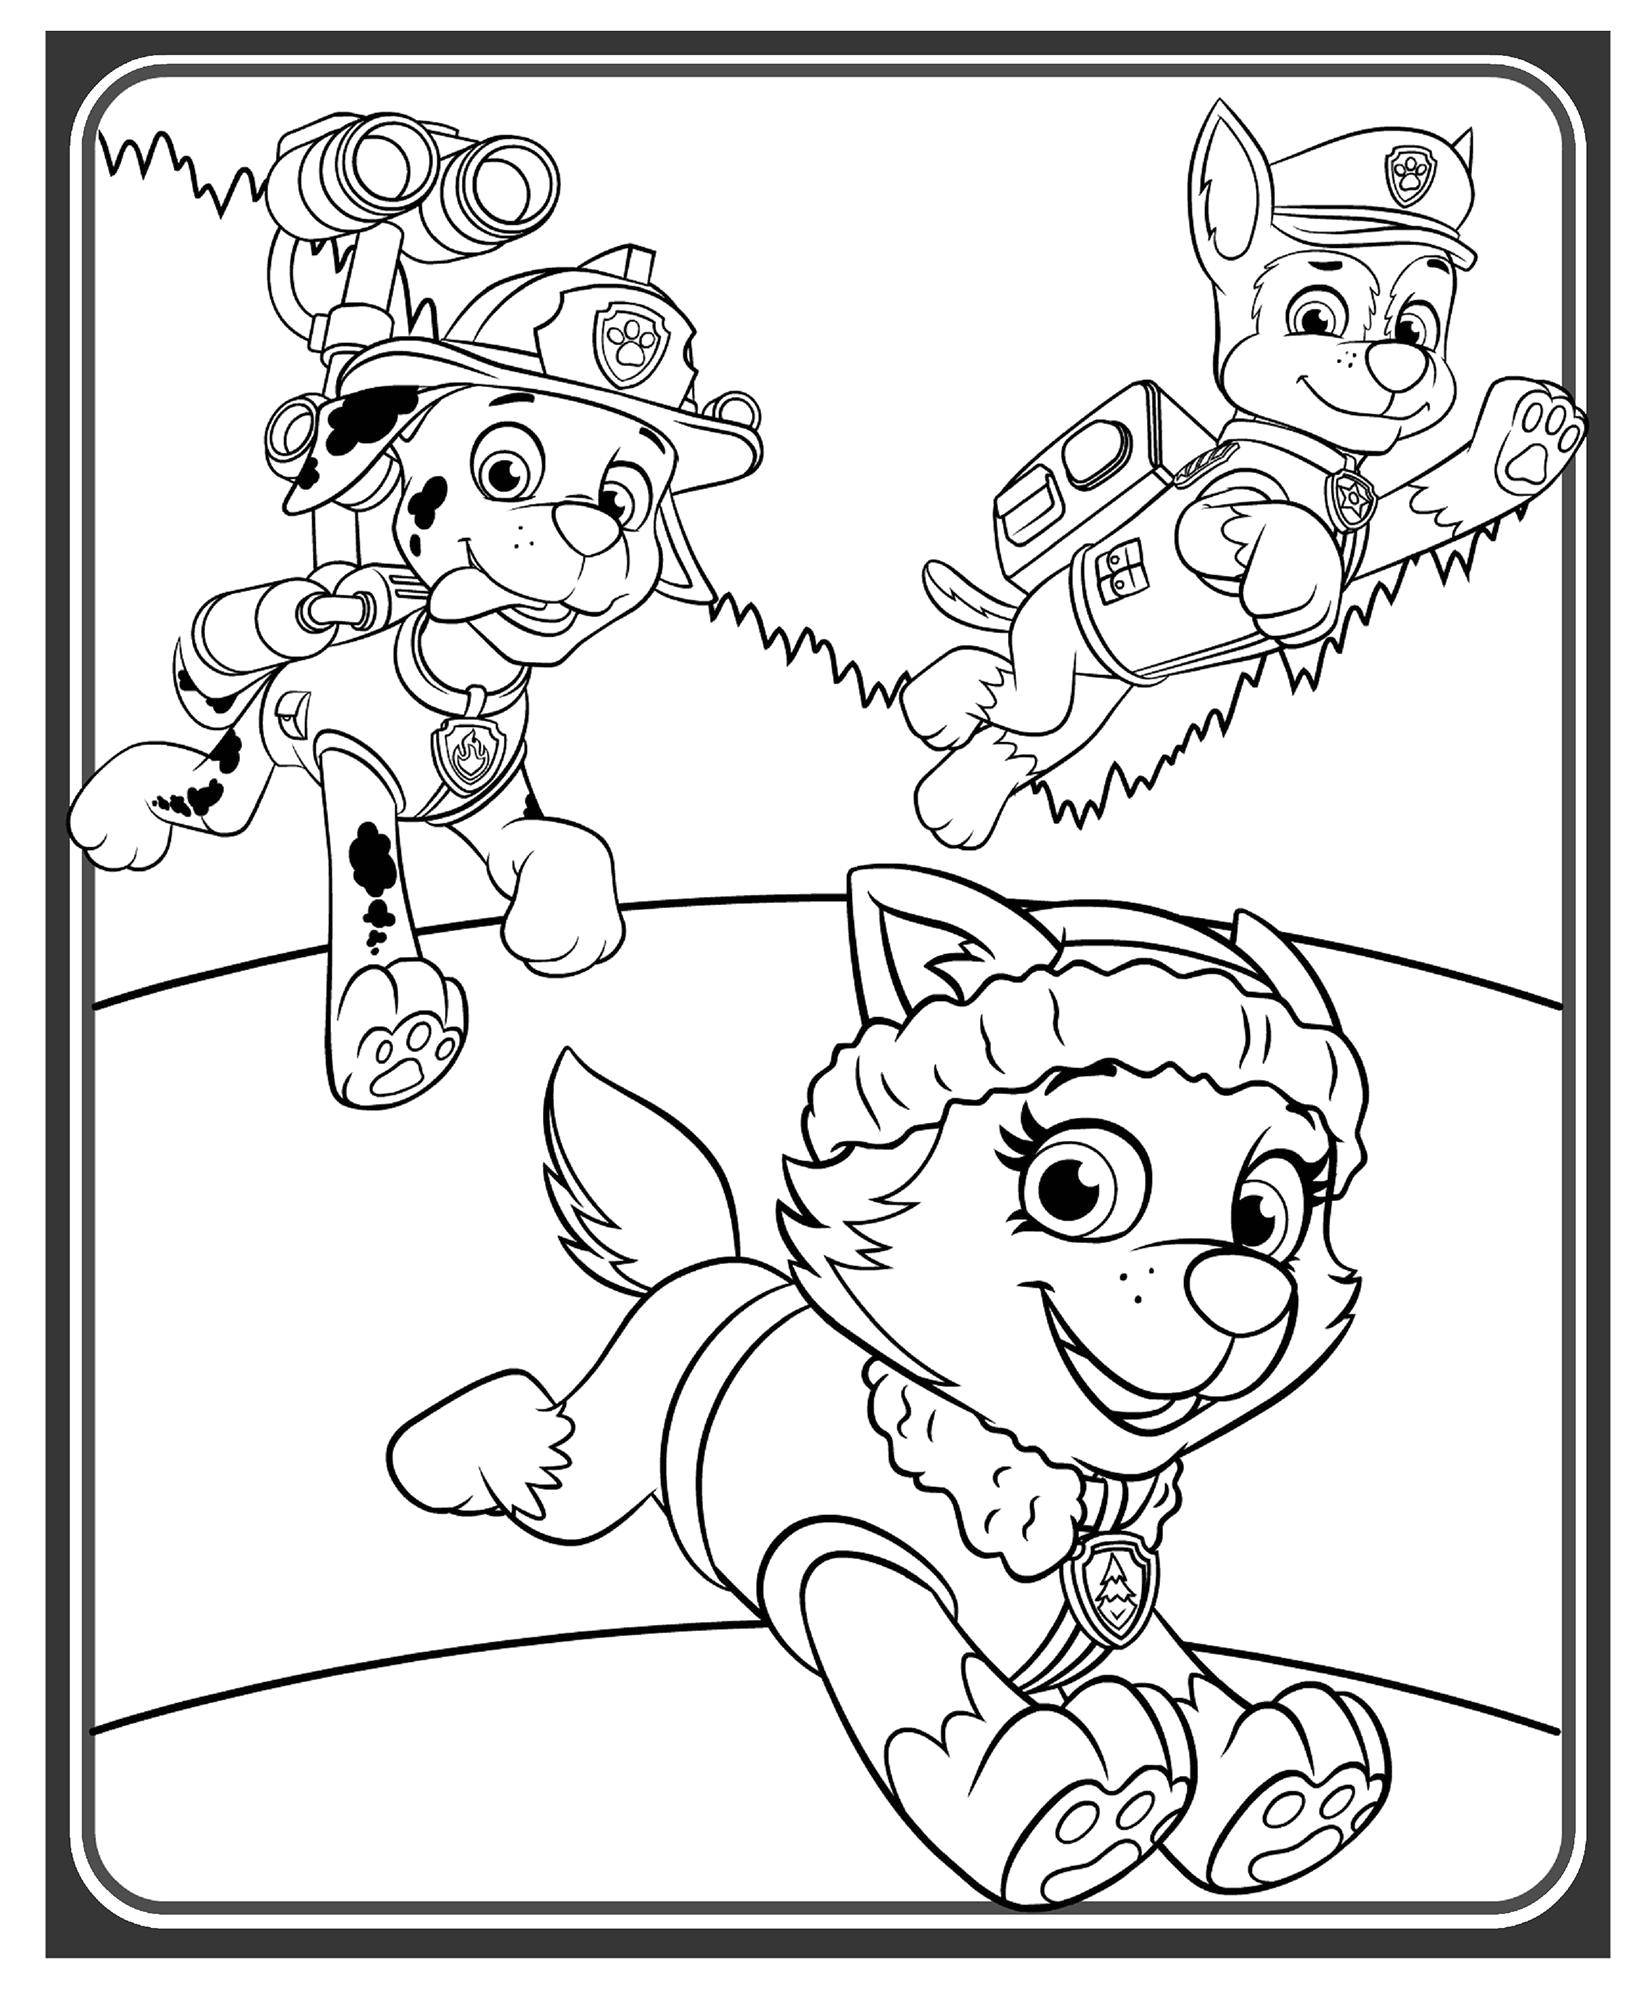 Coloring Chase, Marshall and Skye. Category paw patrol. Tags:  Paw patrol.